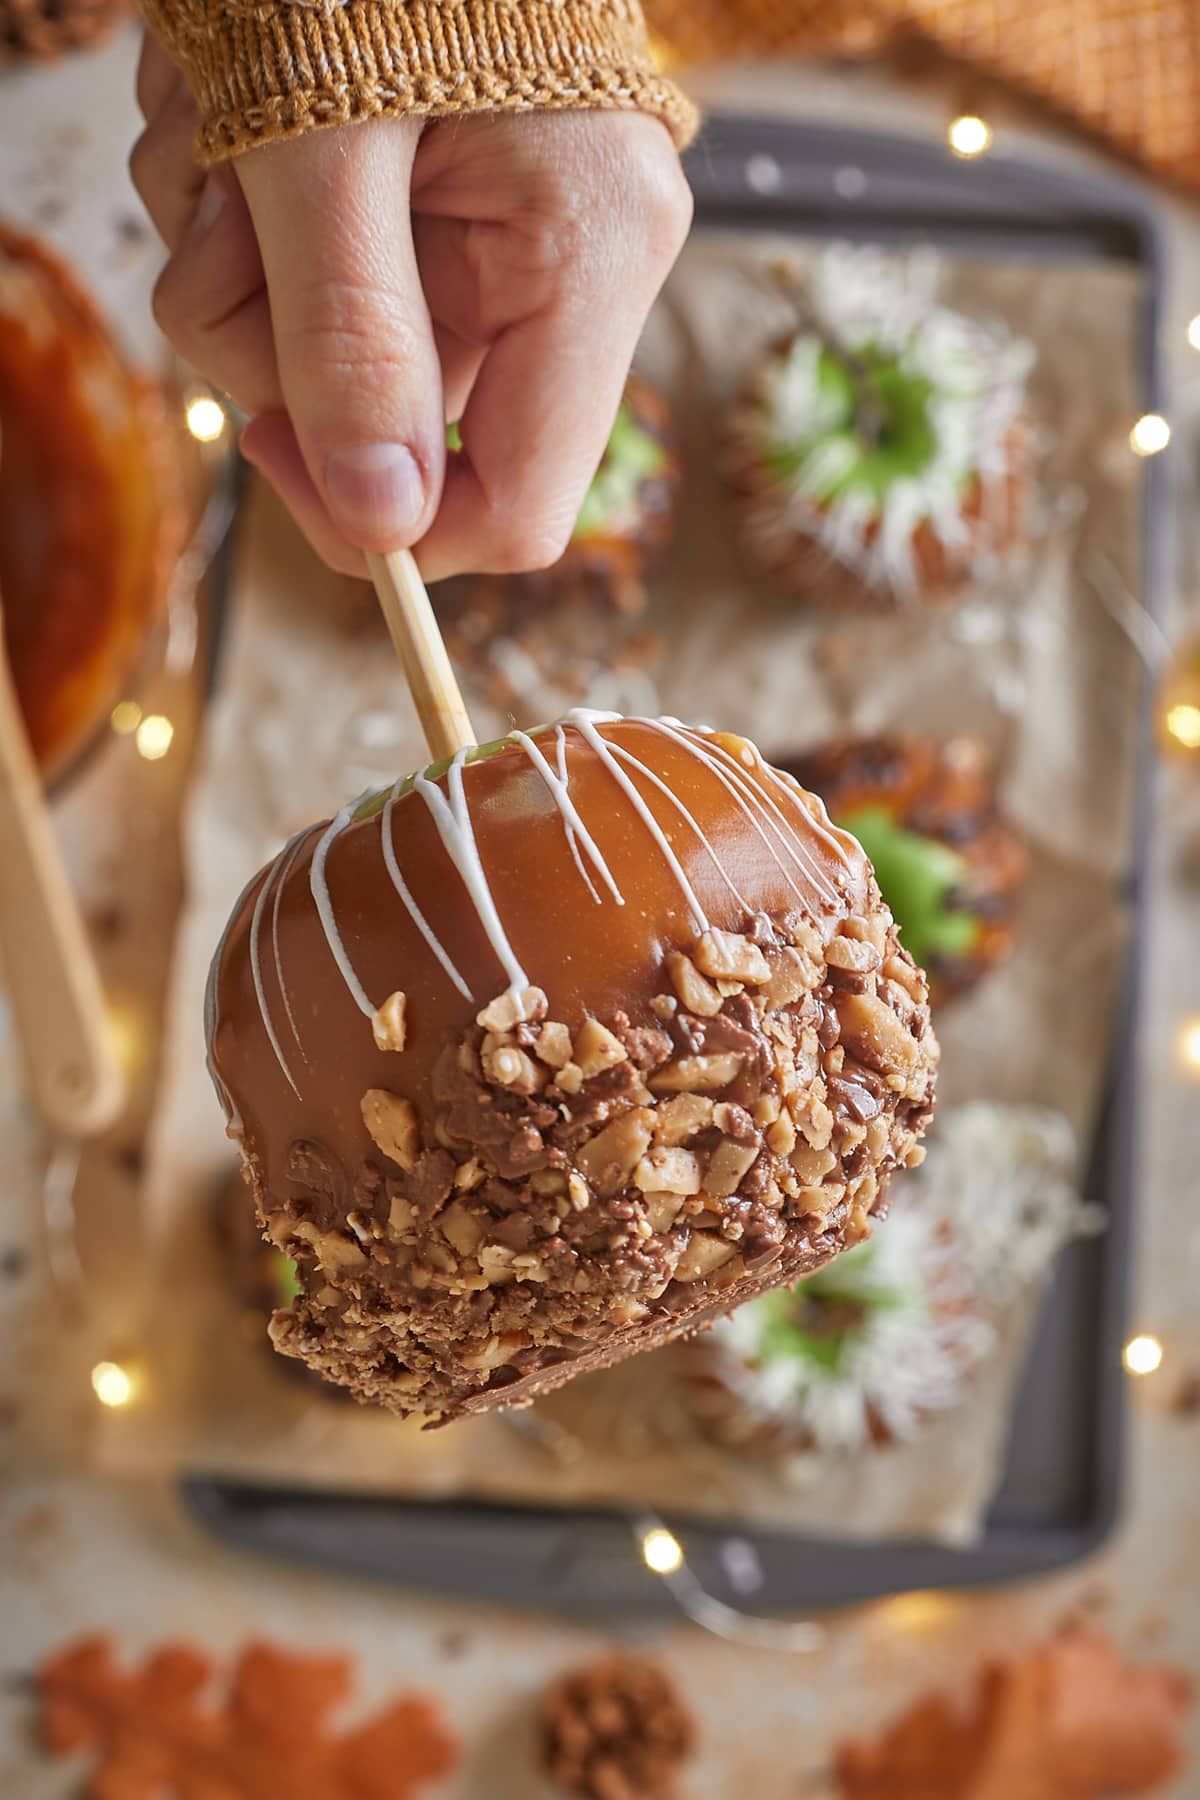 A hand holding a caramel apple dipped into toffee bits